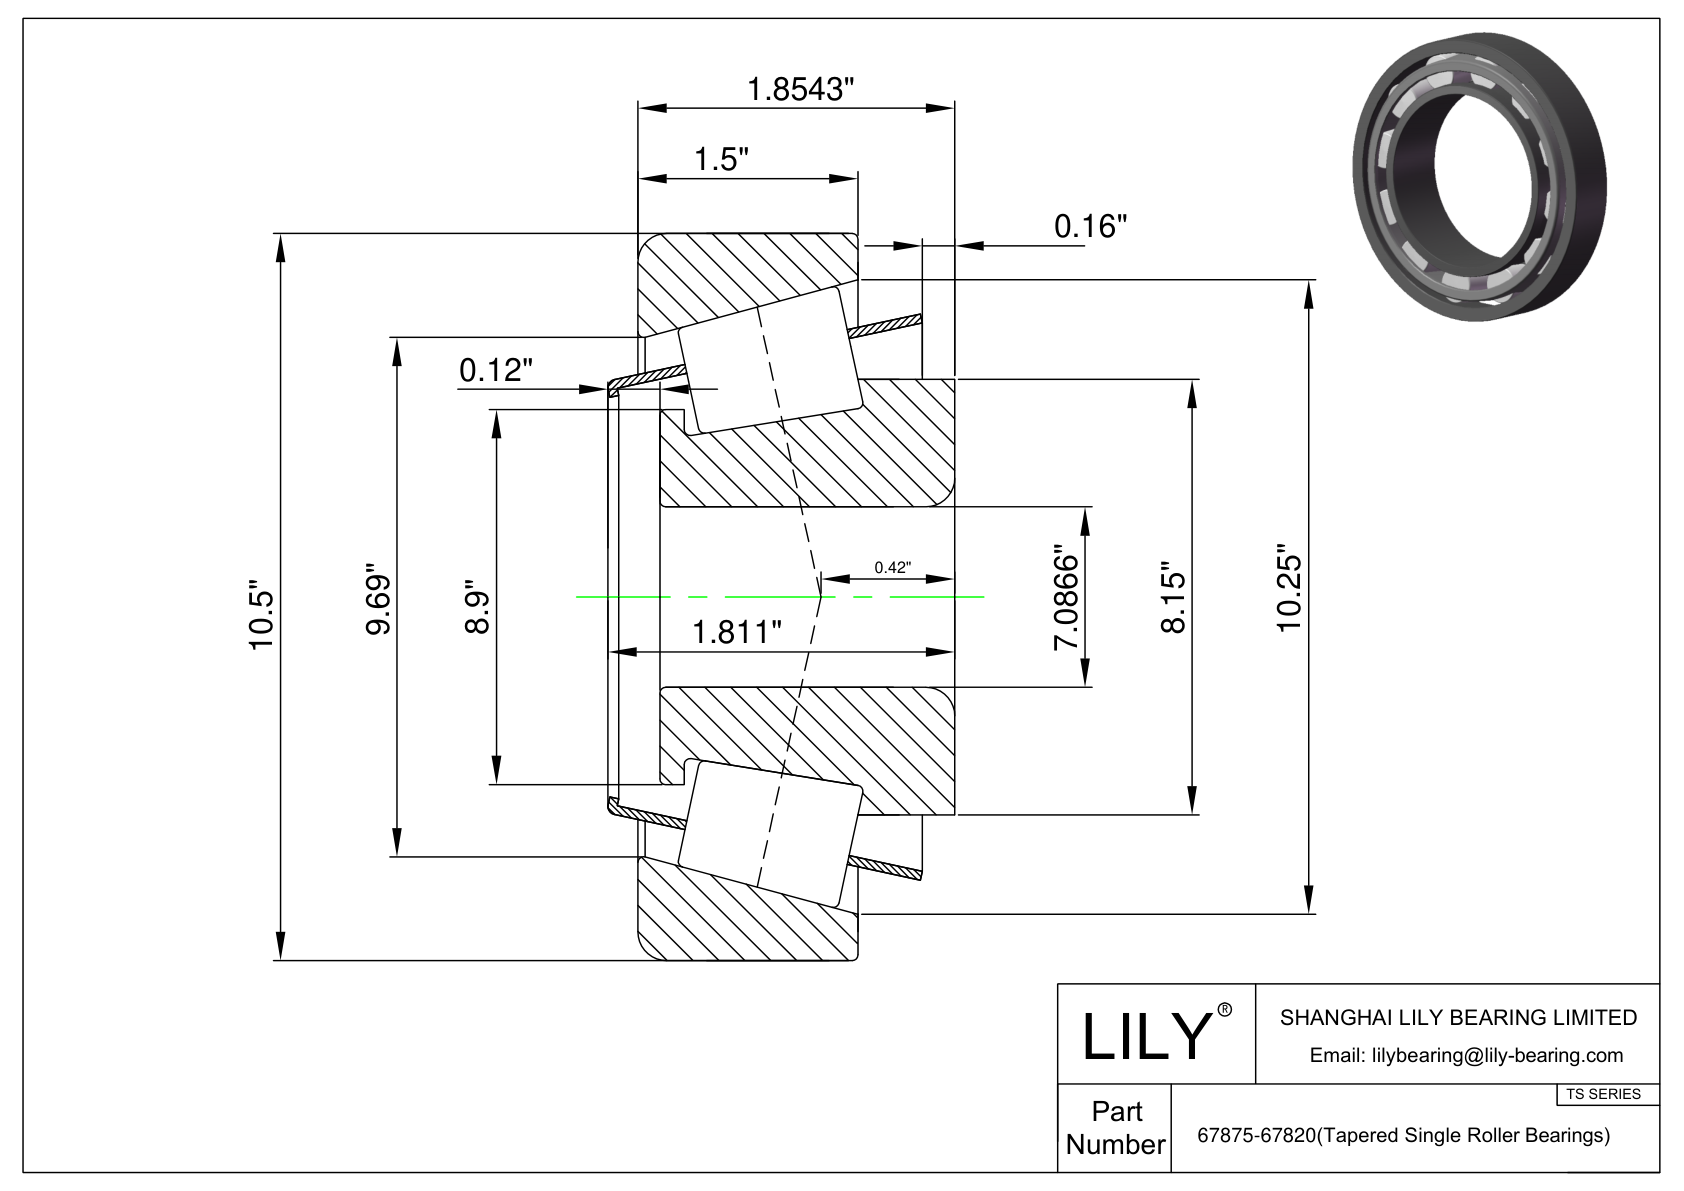 67875-67820 TS (Tapered Single Roller Bearings) (Imperial) cad drawing